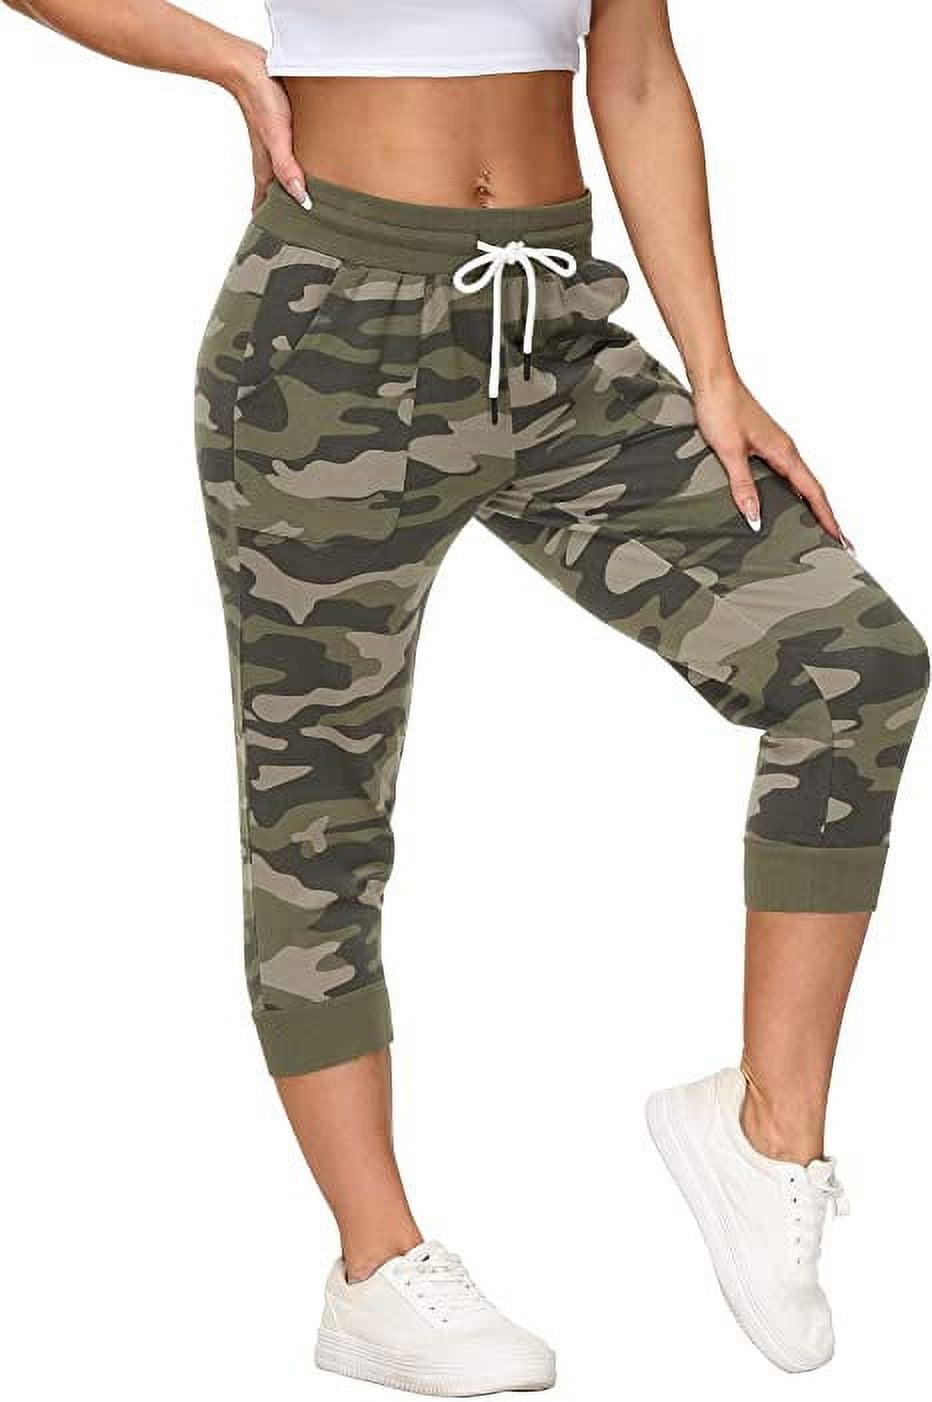 SPECIAL MAGIC Women's Capri Sweatpants Jogger Cargo Pants with Pockets for  both Sports and Casual Wear(Steel Blue S) 